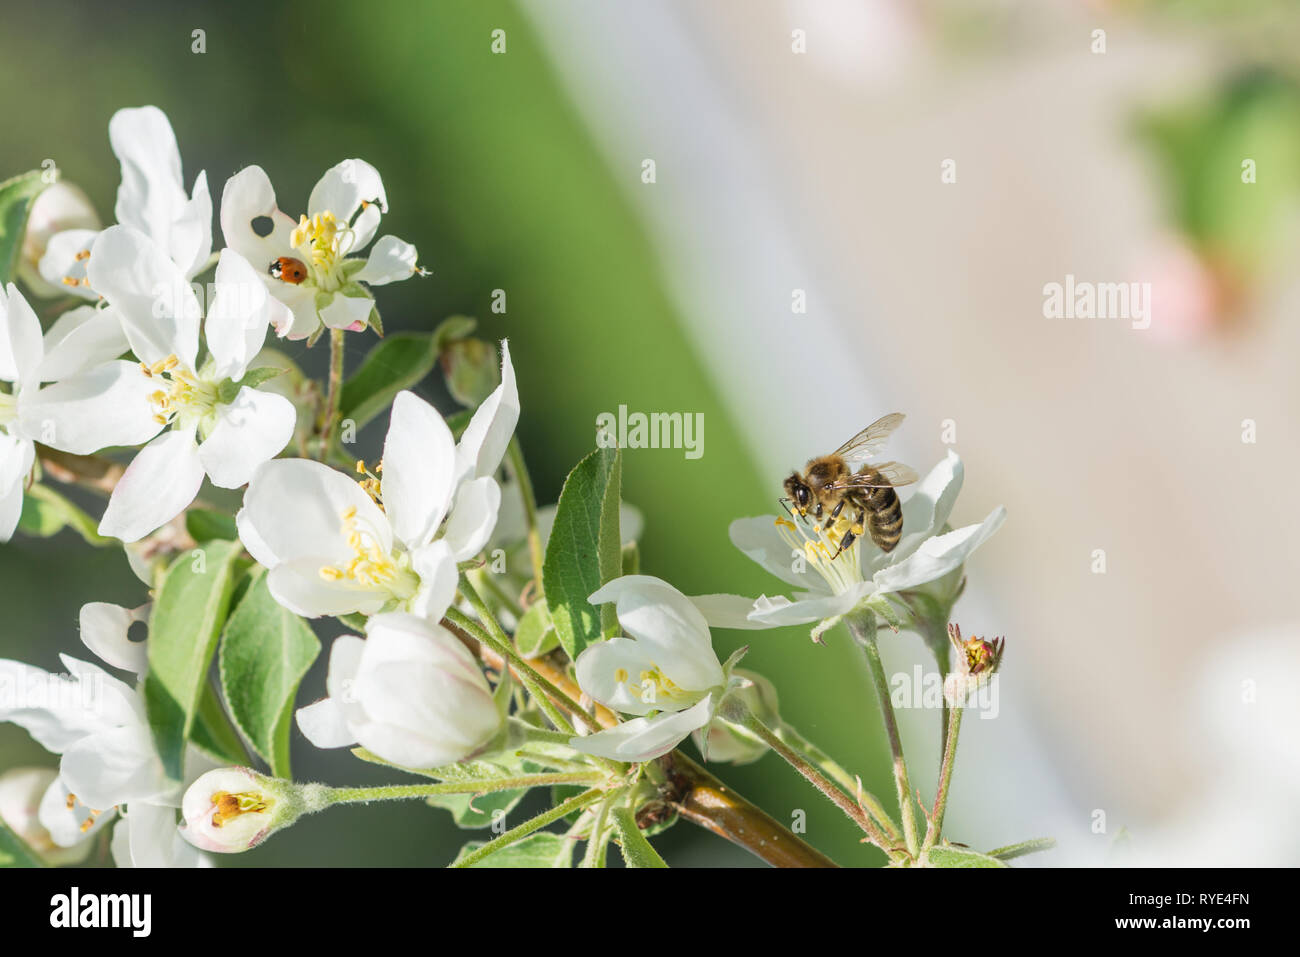 Bee melliferous collects nectar from a white flowers of apple tree in a spring garden close-up Stock Photo